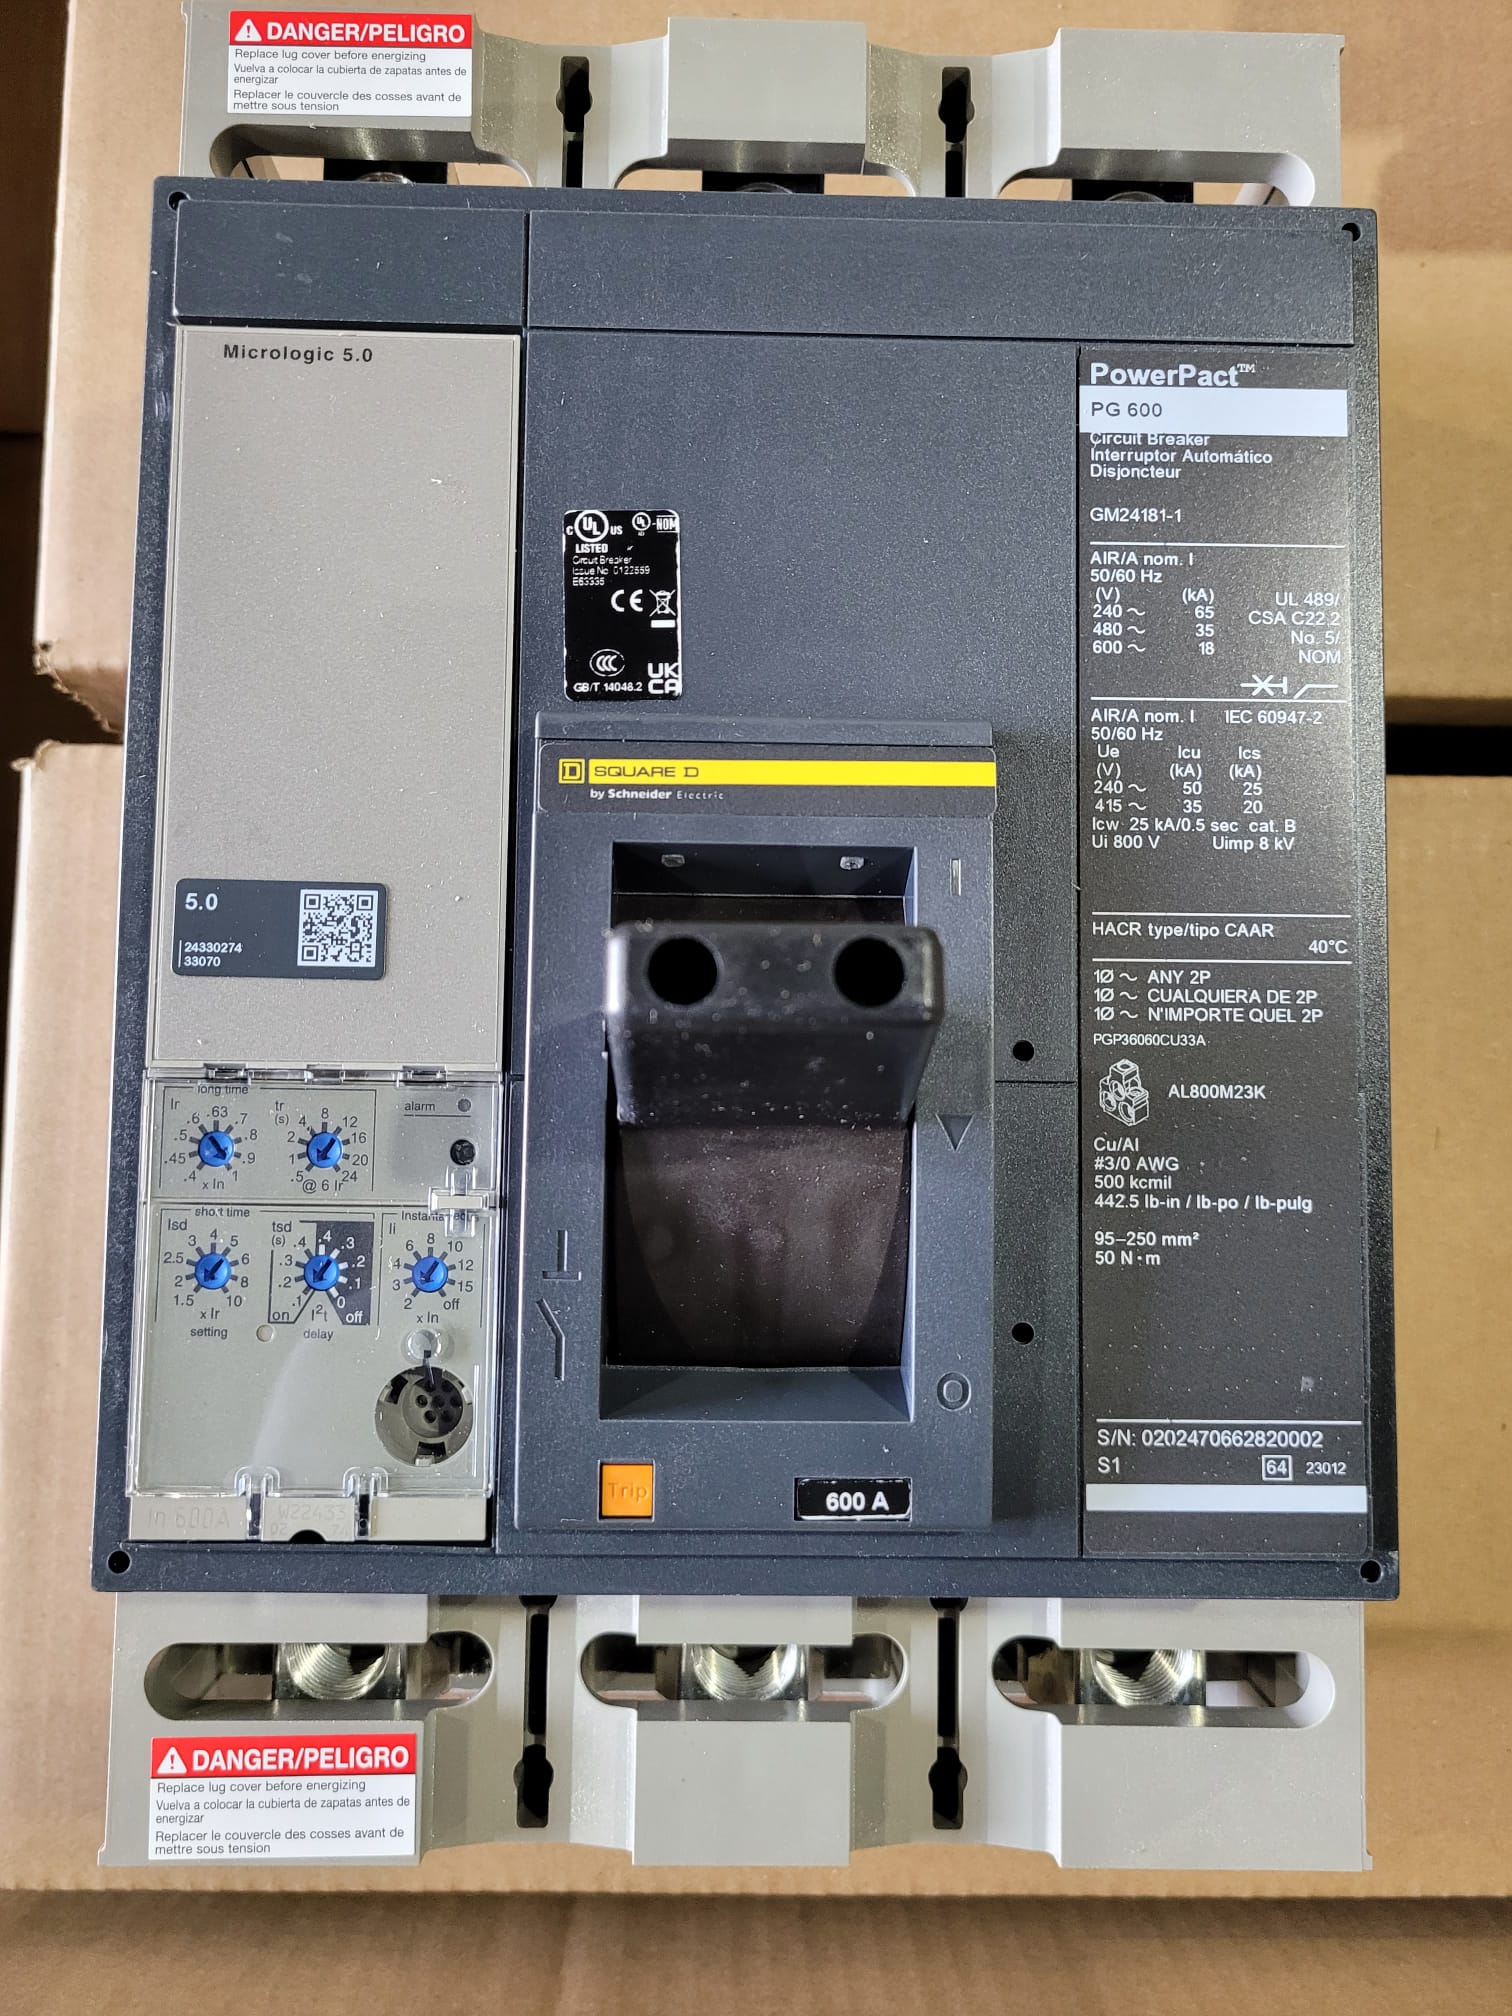 New 600 Amp Square D PGP36060CU33A LSI Breaker – 5 Available